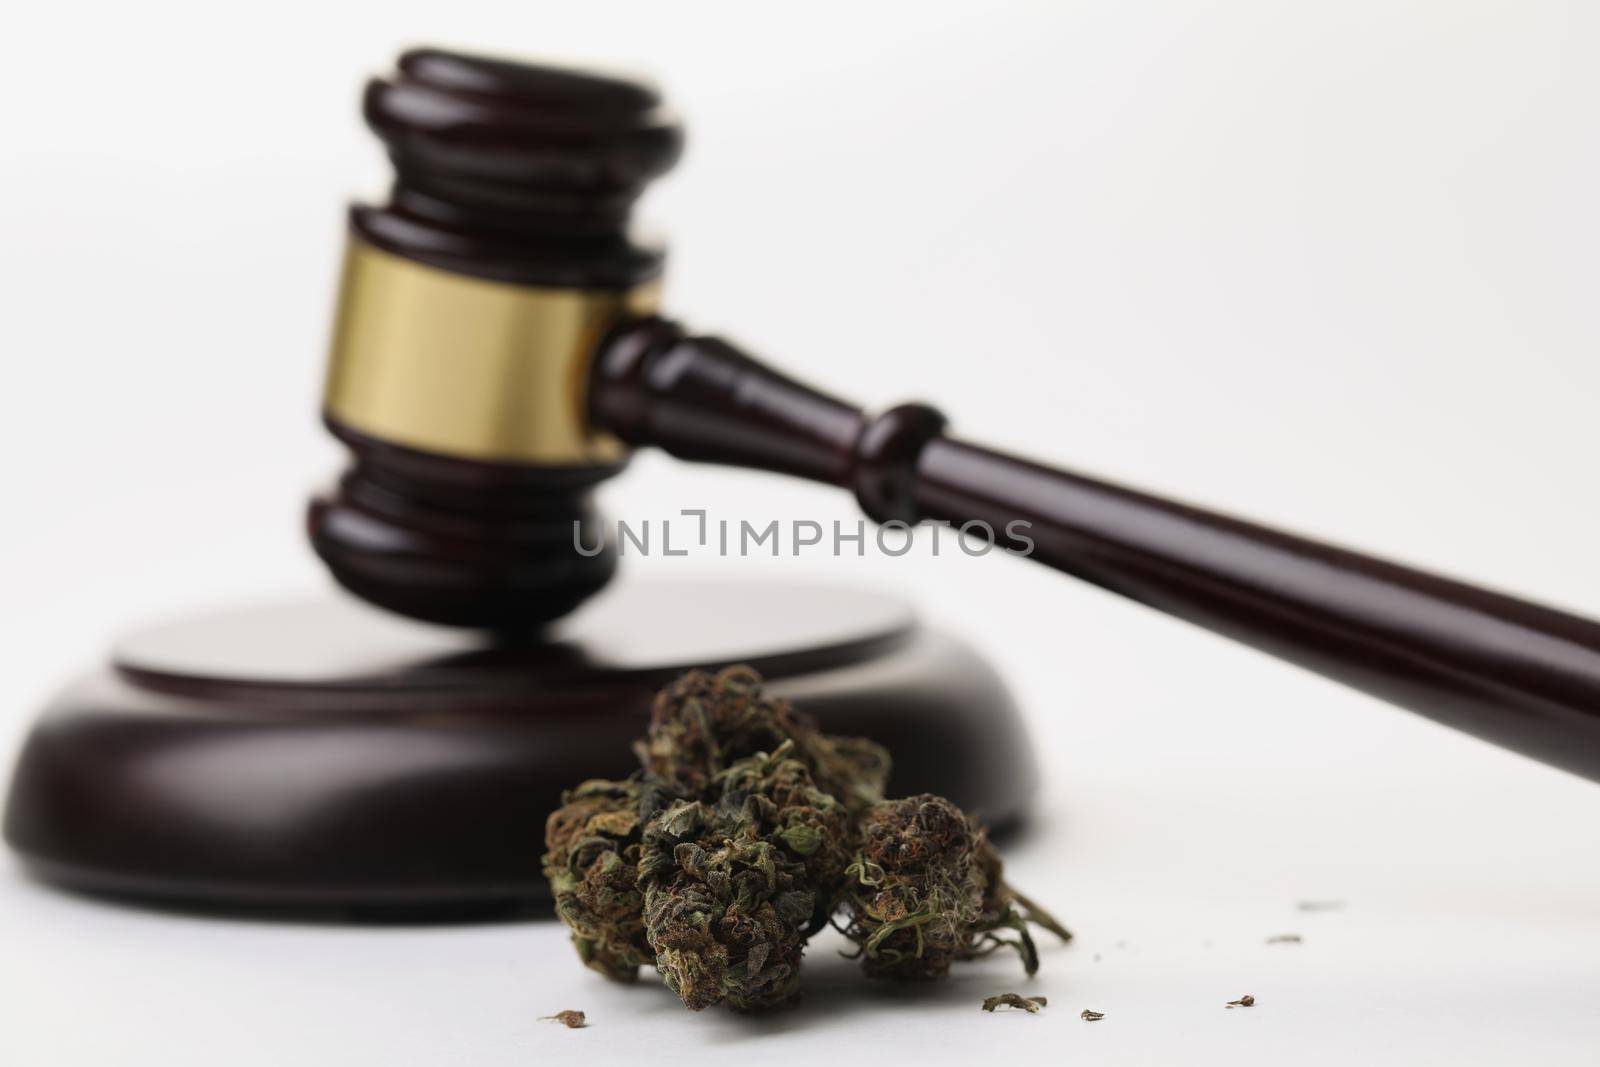 Cannabis herb buds and gavel as symbol of legalization of marijuana by kuprevich